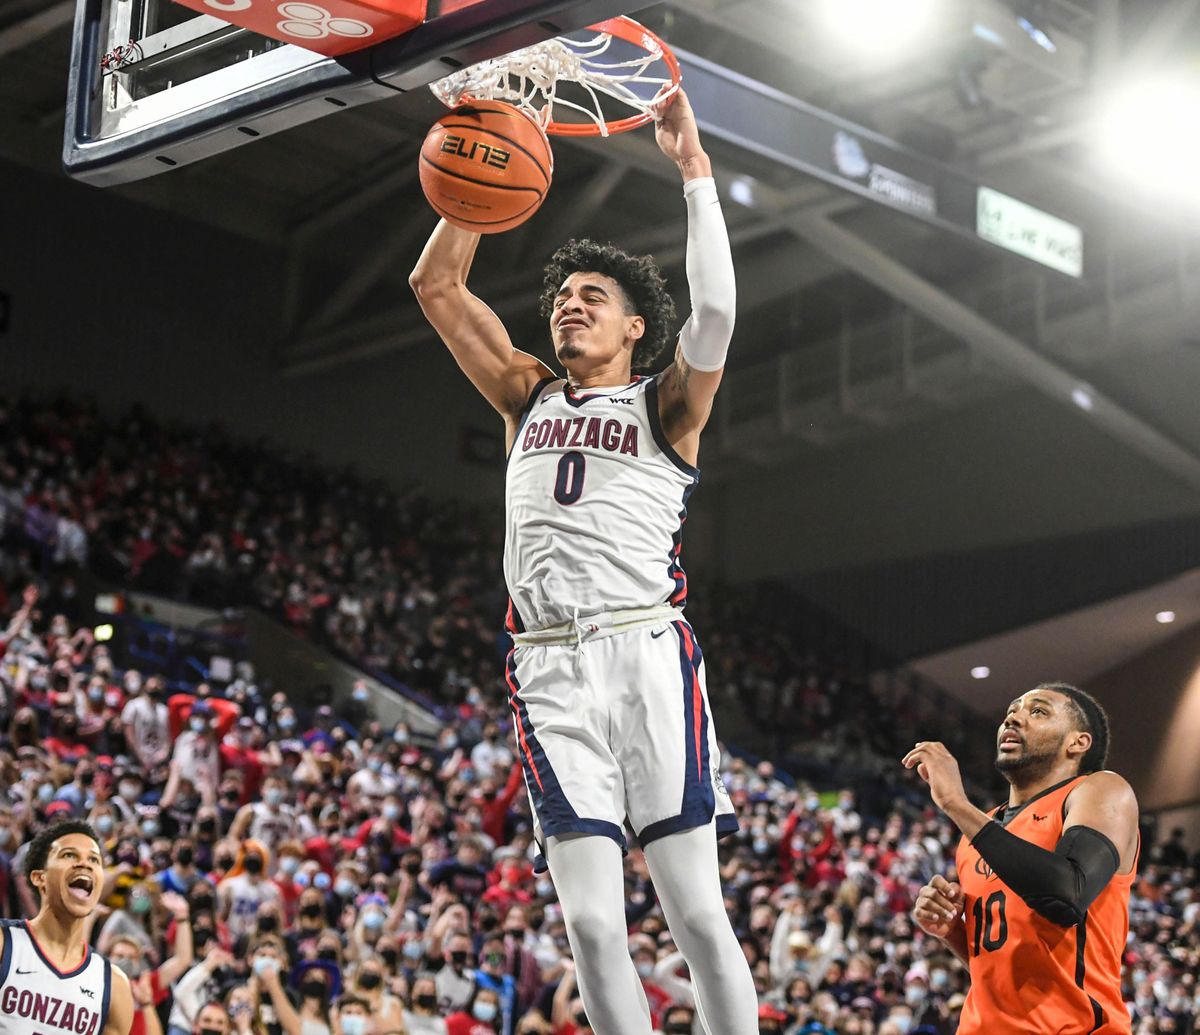 Gonzaga guard Julian Strawther dunk past Pacific guard Alphonso Anderson during Thursday night’s West Coast Conference game at the McCarthey Athletic Center.  (Dan Pelle / The Spokesman-Review)